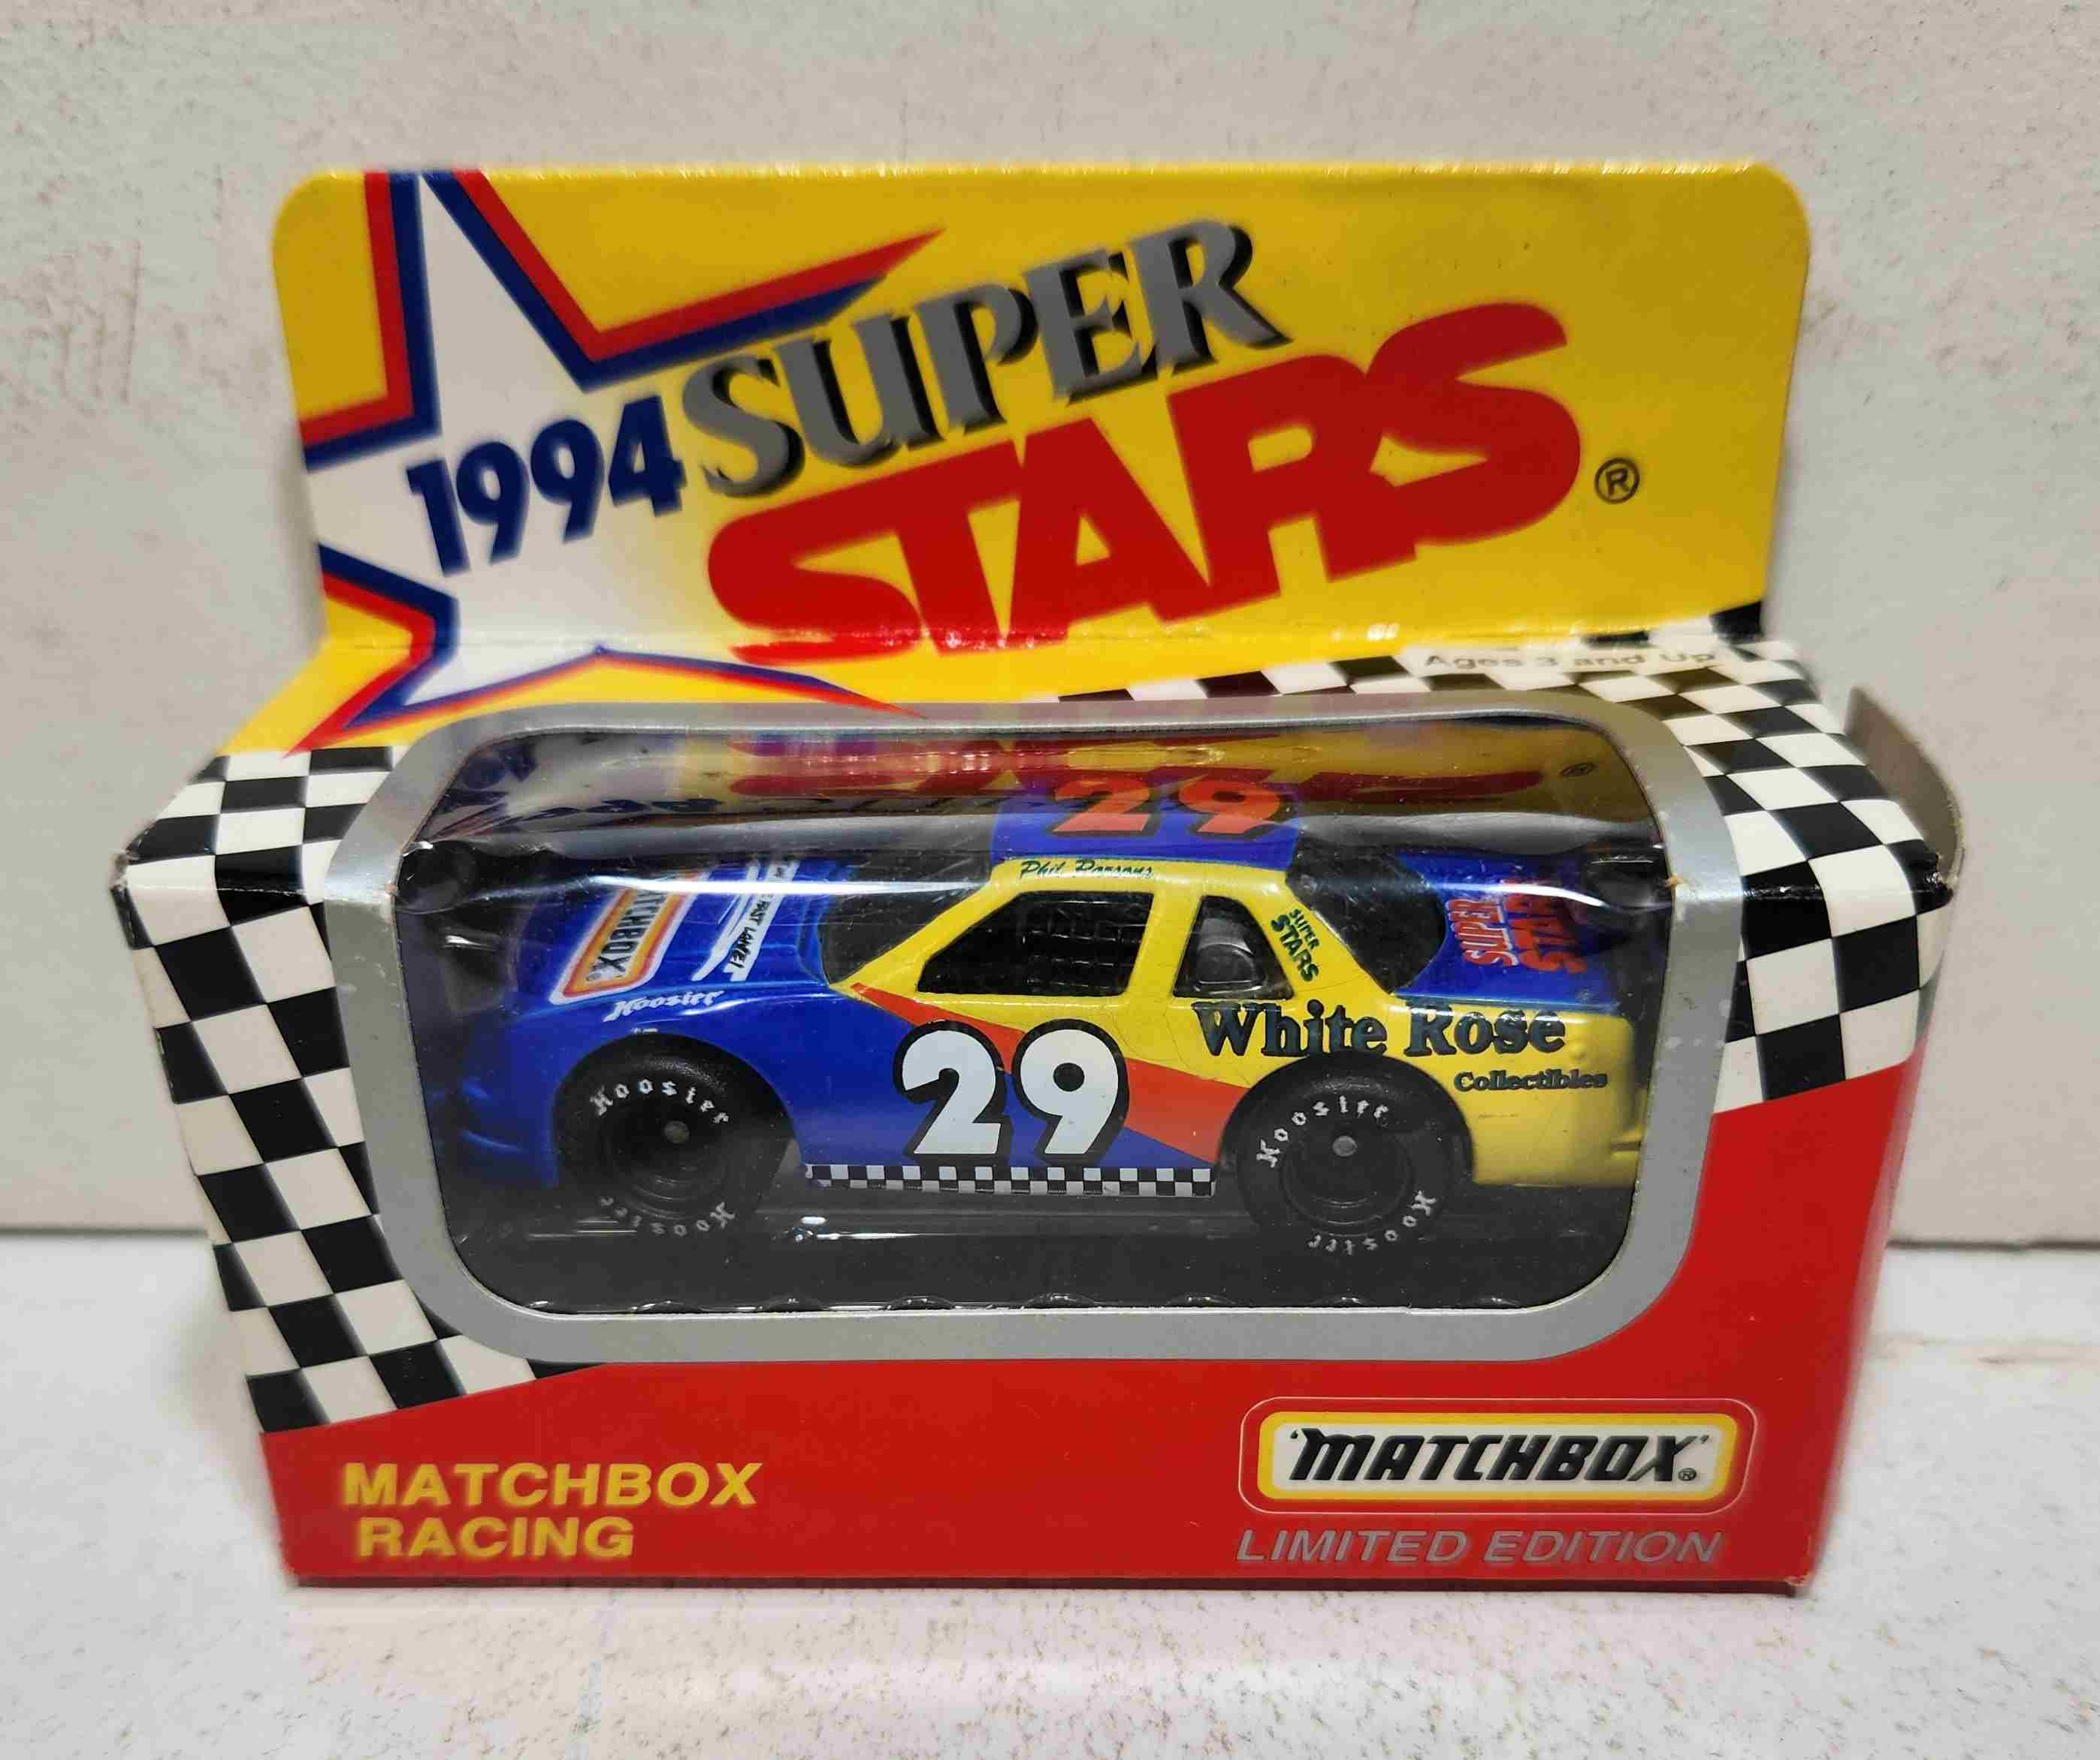 1994 Phil Parsons 1/64th White Rose Collectibles Matchbox Racing car